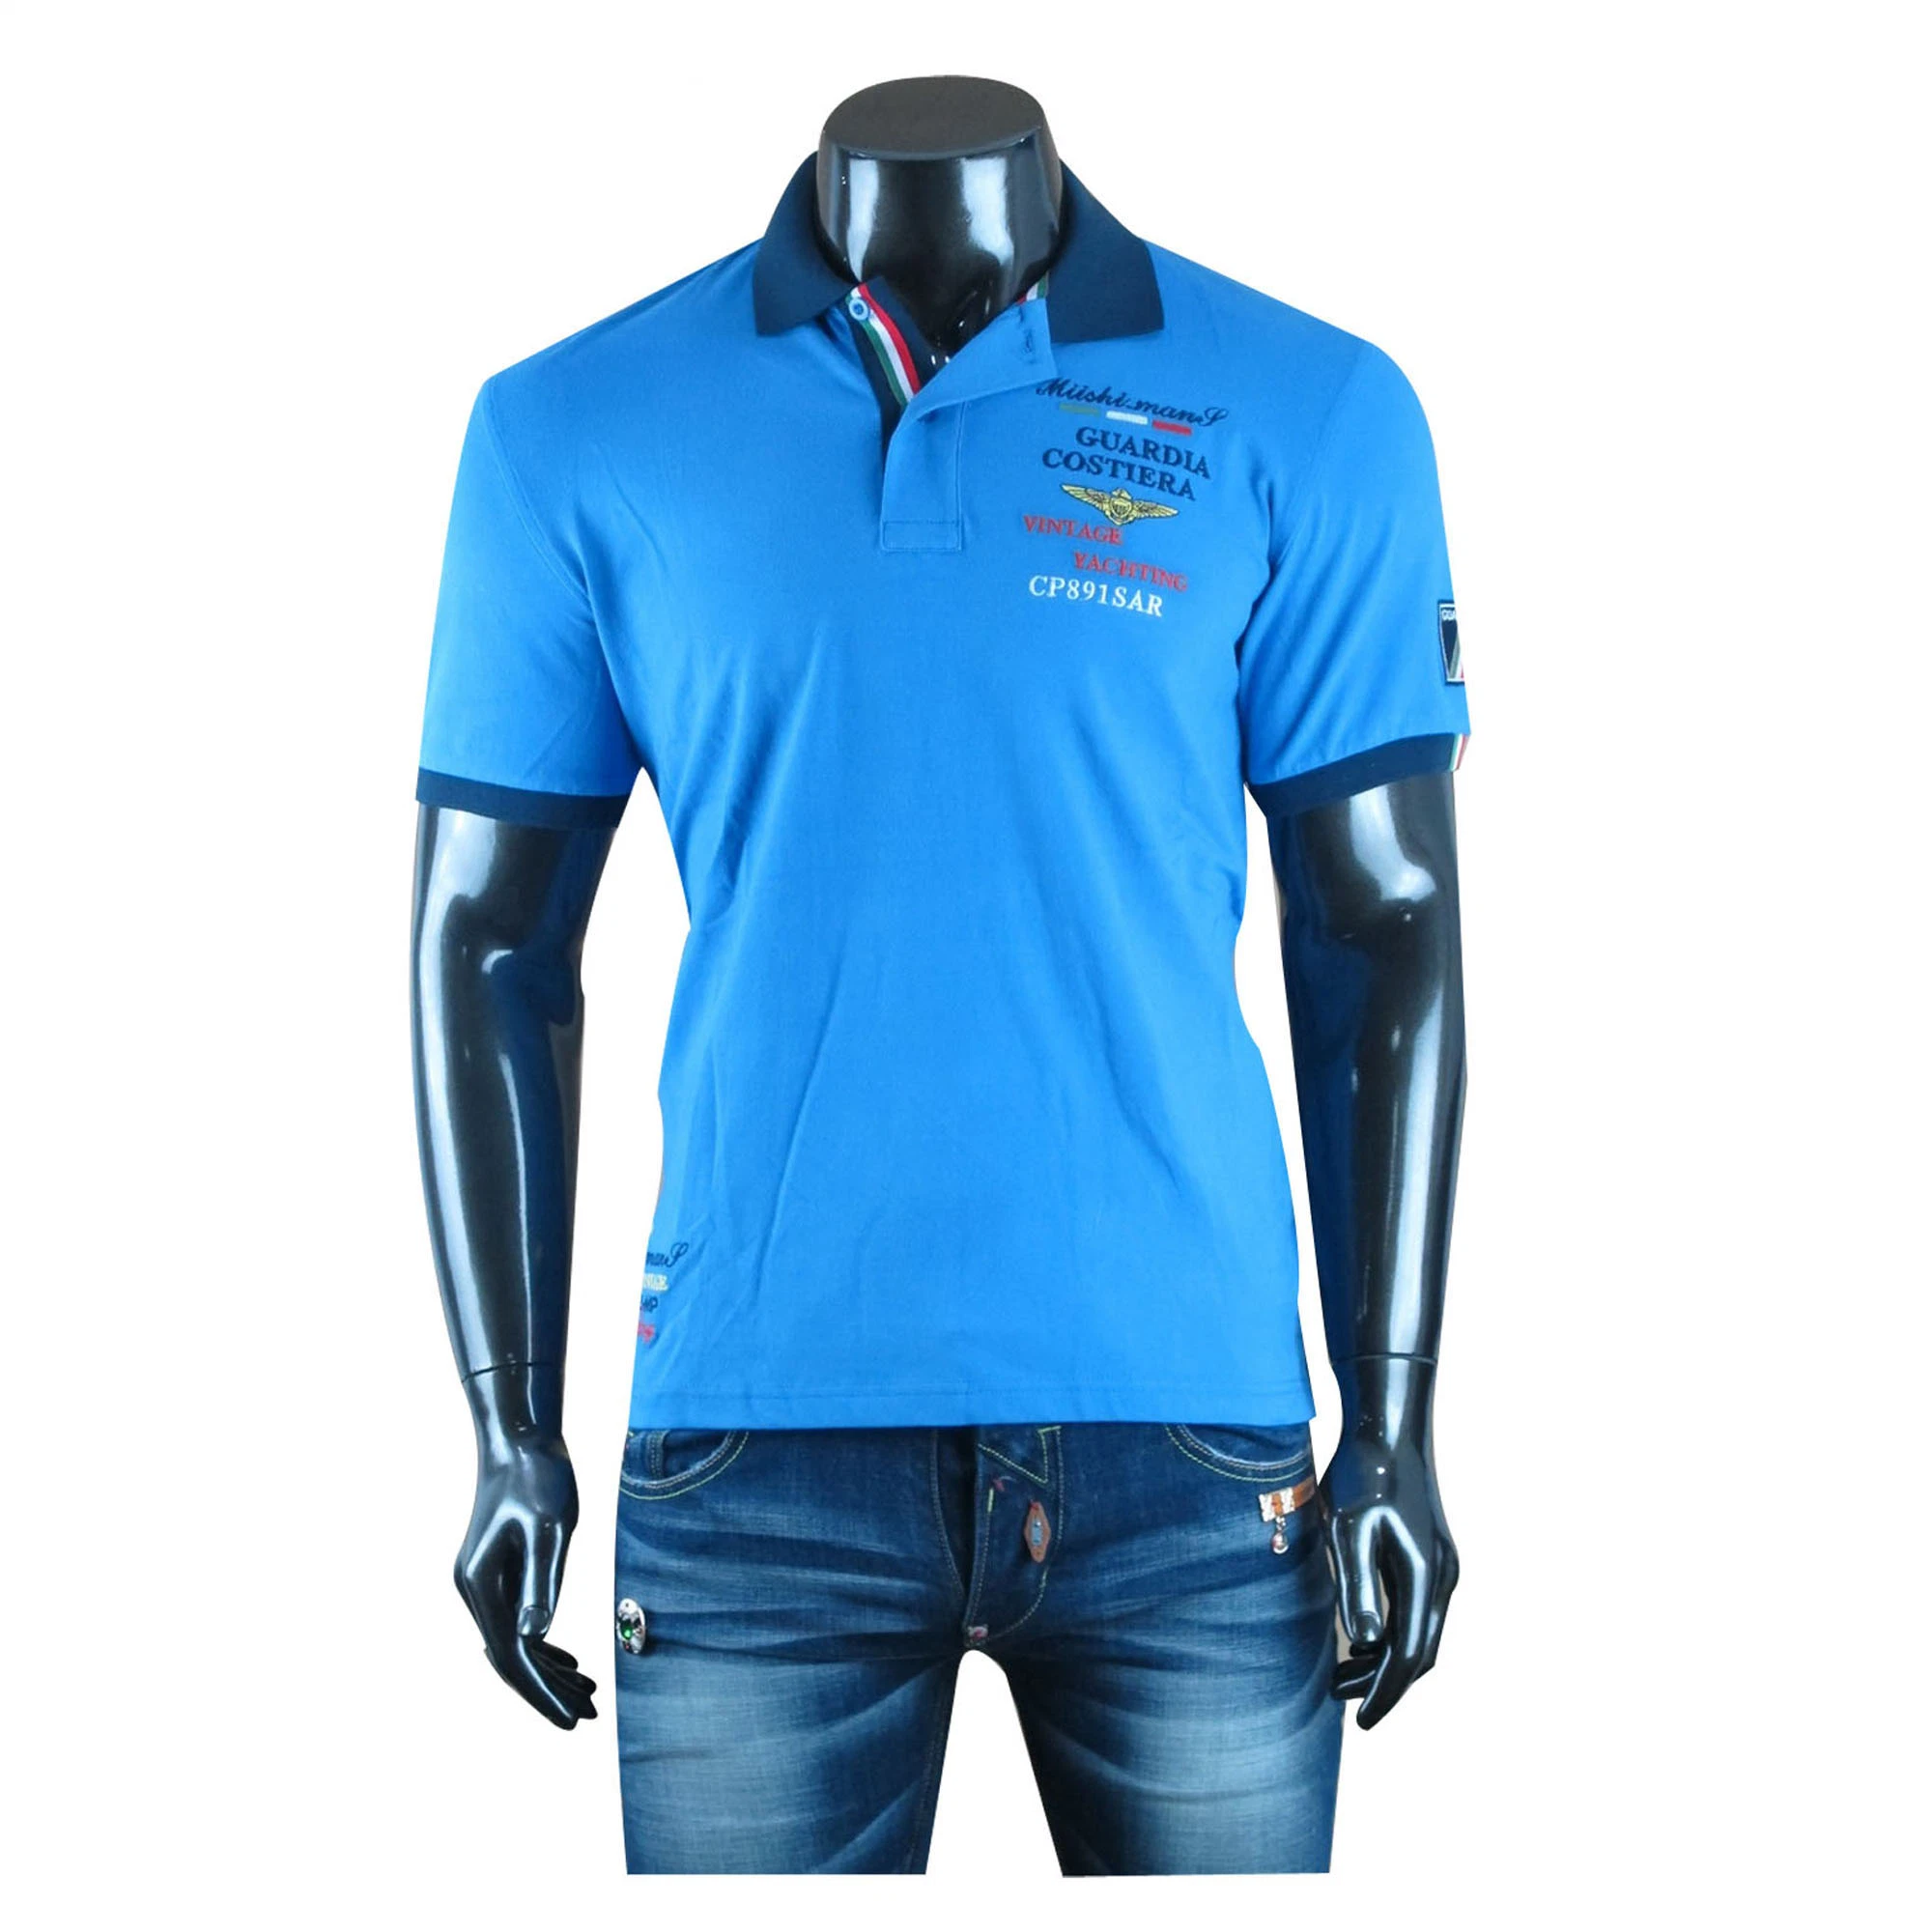 Custom/Customized Clothes/Clothing Plain/Blank/Stripe Printing/Printed/Embroidery Apparel/Garment Cotton/Polyester Pique/Jersey Polo Shirt